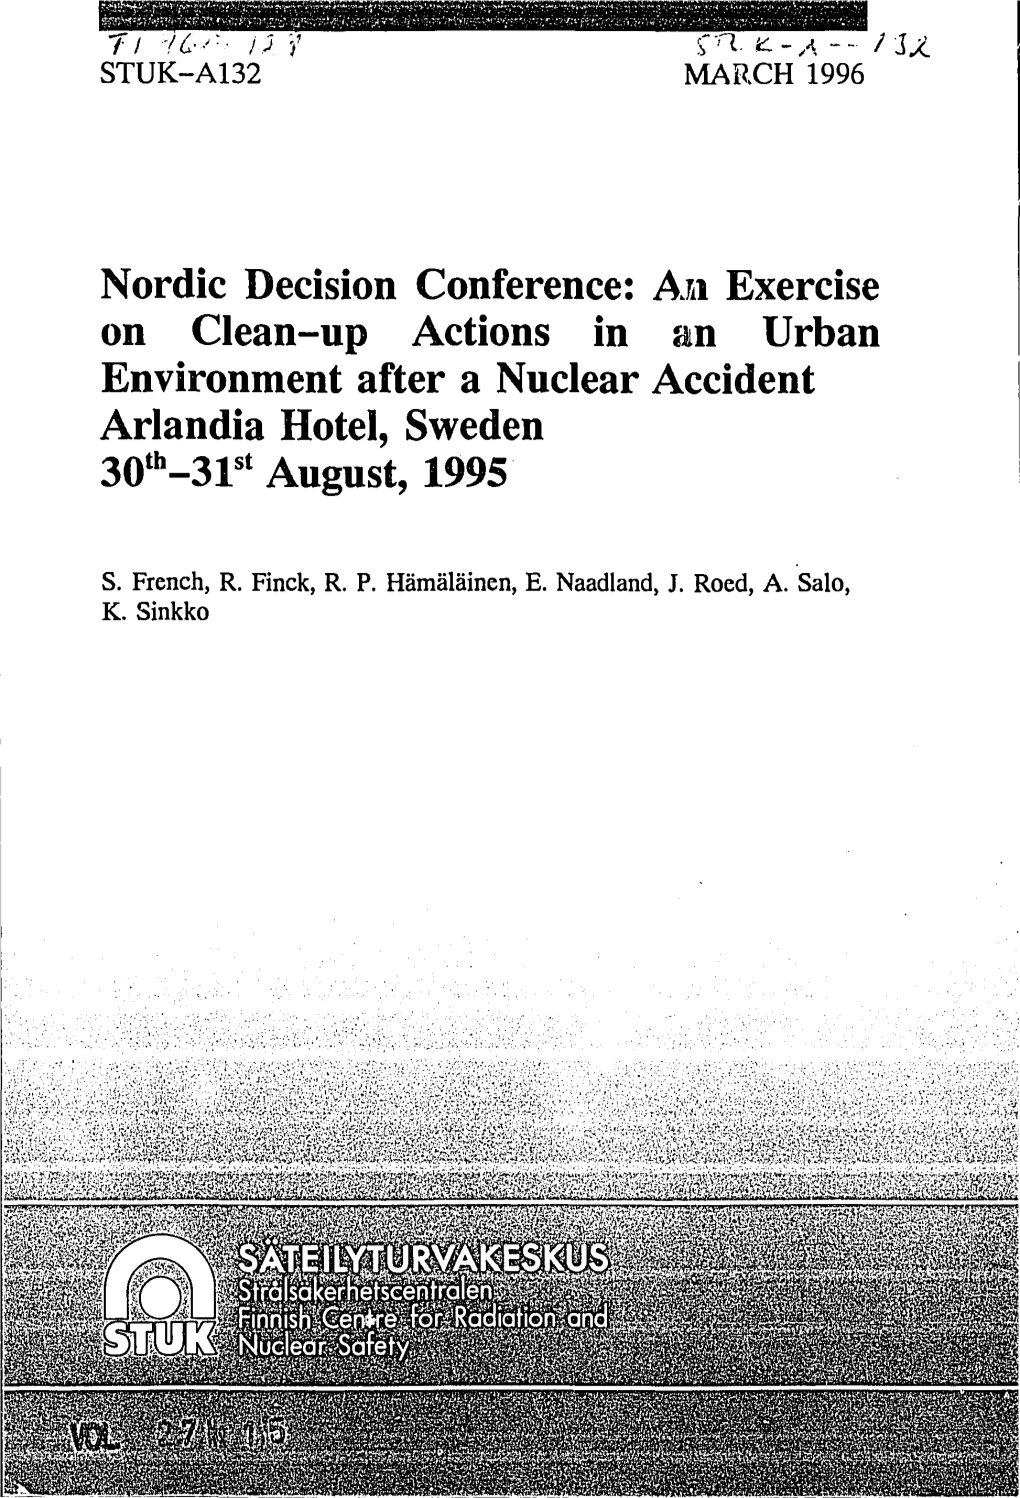 An Exercise on Clean-Up Actions in an Urban Environment After a Nuclear Accident Arlandia Hotel, Sweden 30Th-31St August, 1995